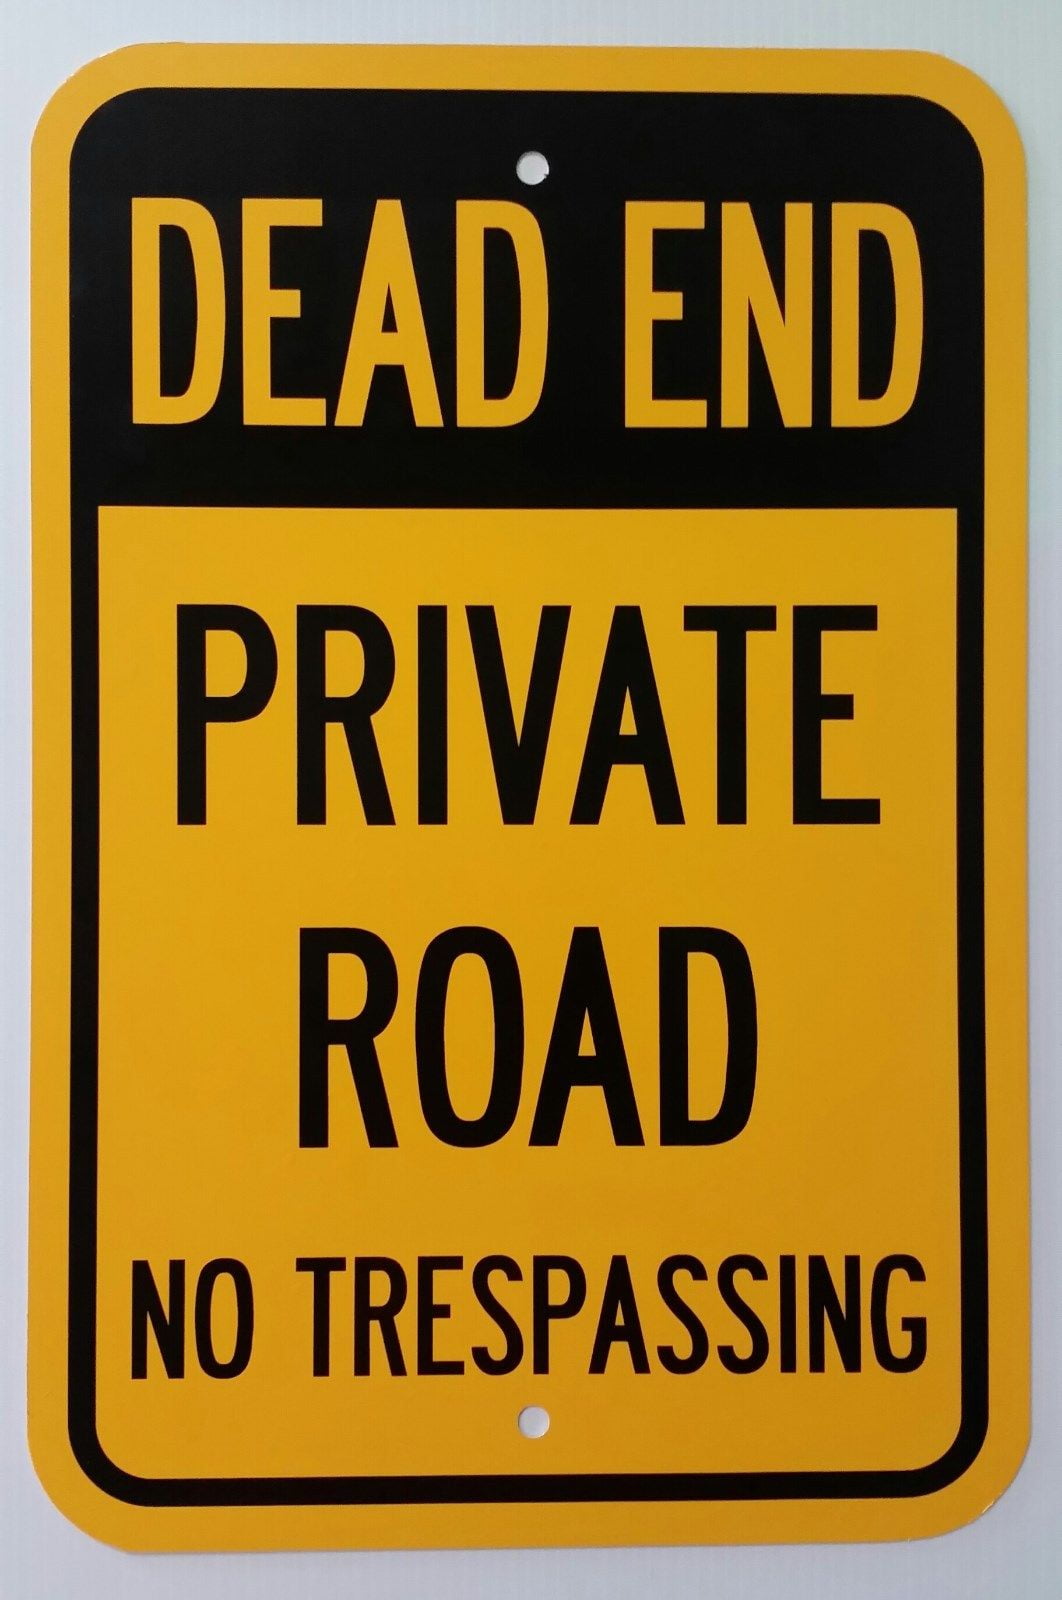 No Outlet Private Road No Trespassing 8" x 12" Aluminum Sign Made in USA Yel/Blk 